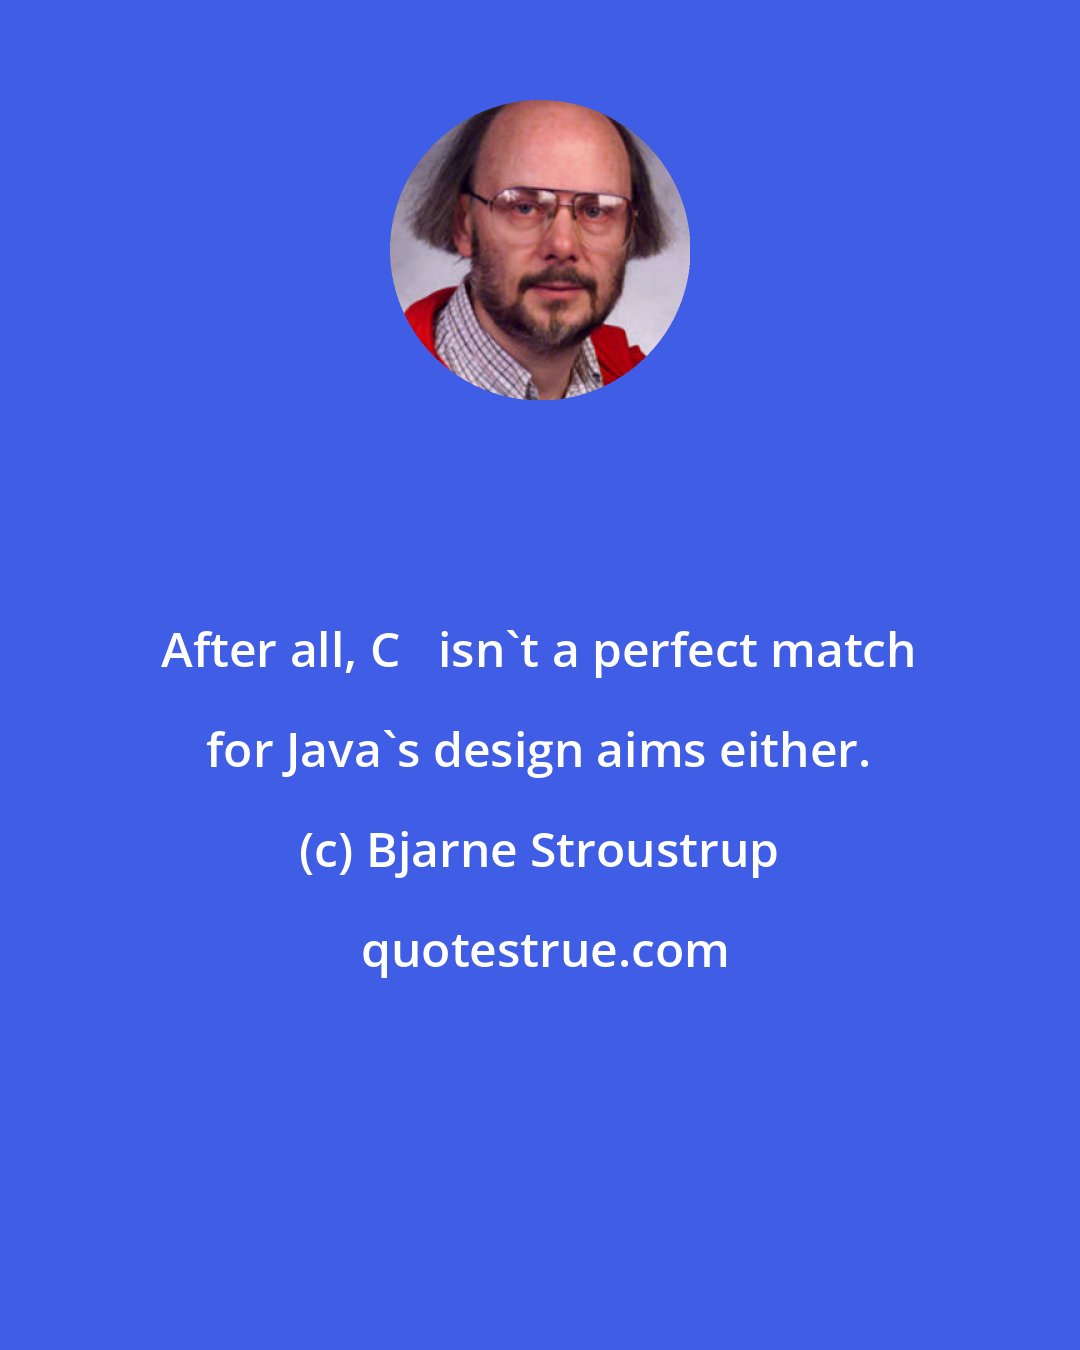 Bjarne Stroustrup: After all, C++ isn't a perfect match for Java's design aims either.